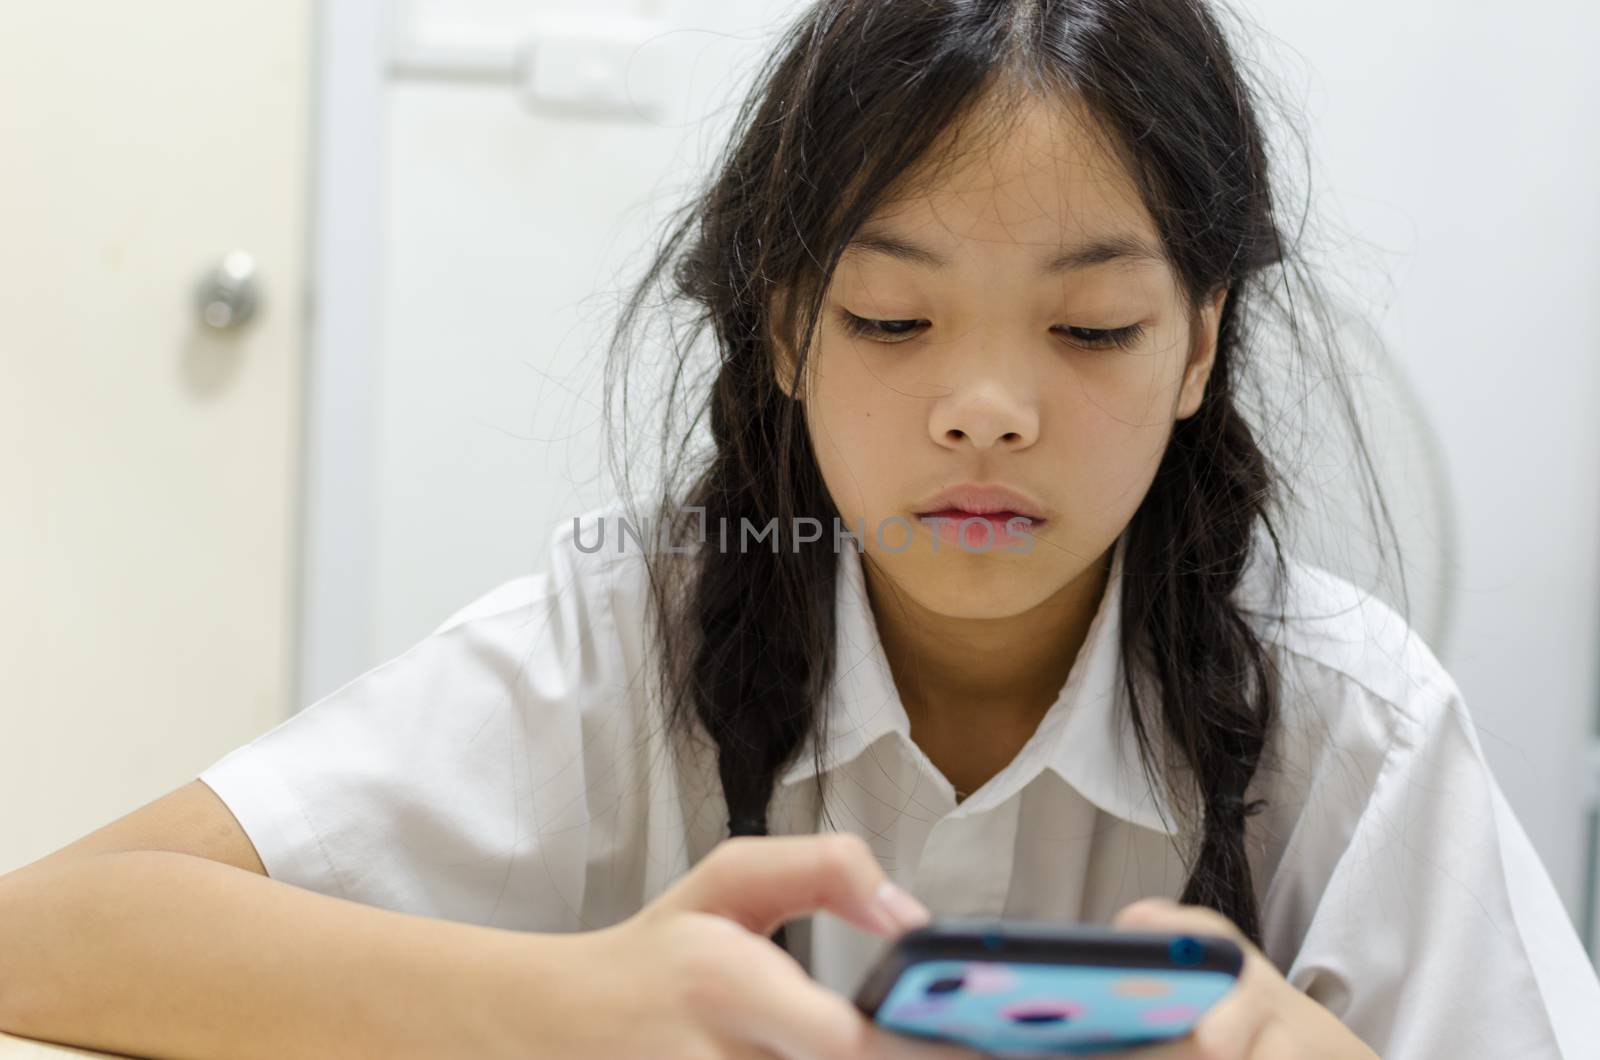 Young schoolgirl addicted to mobile phone games. Makes him not interested in doing homework.